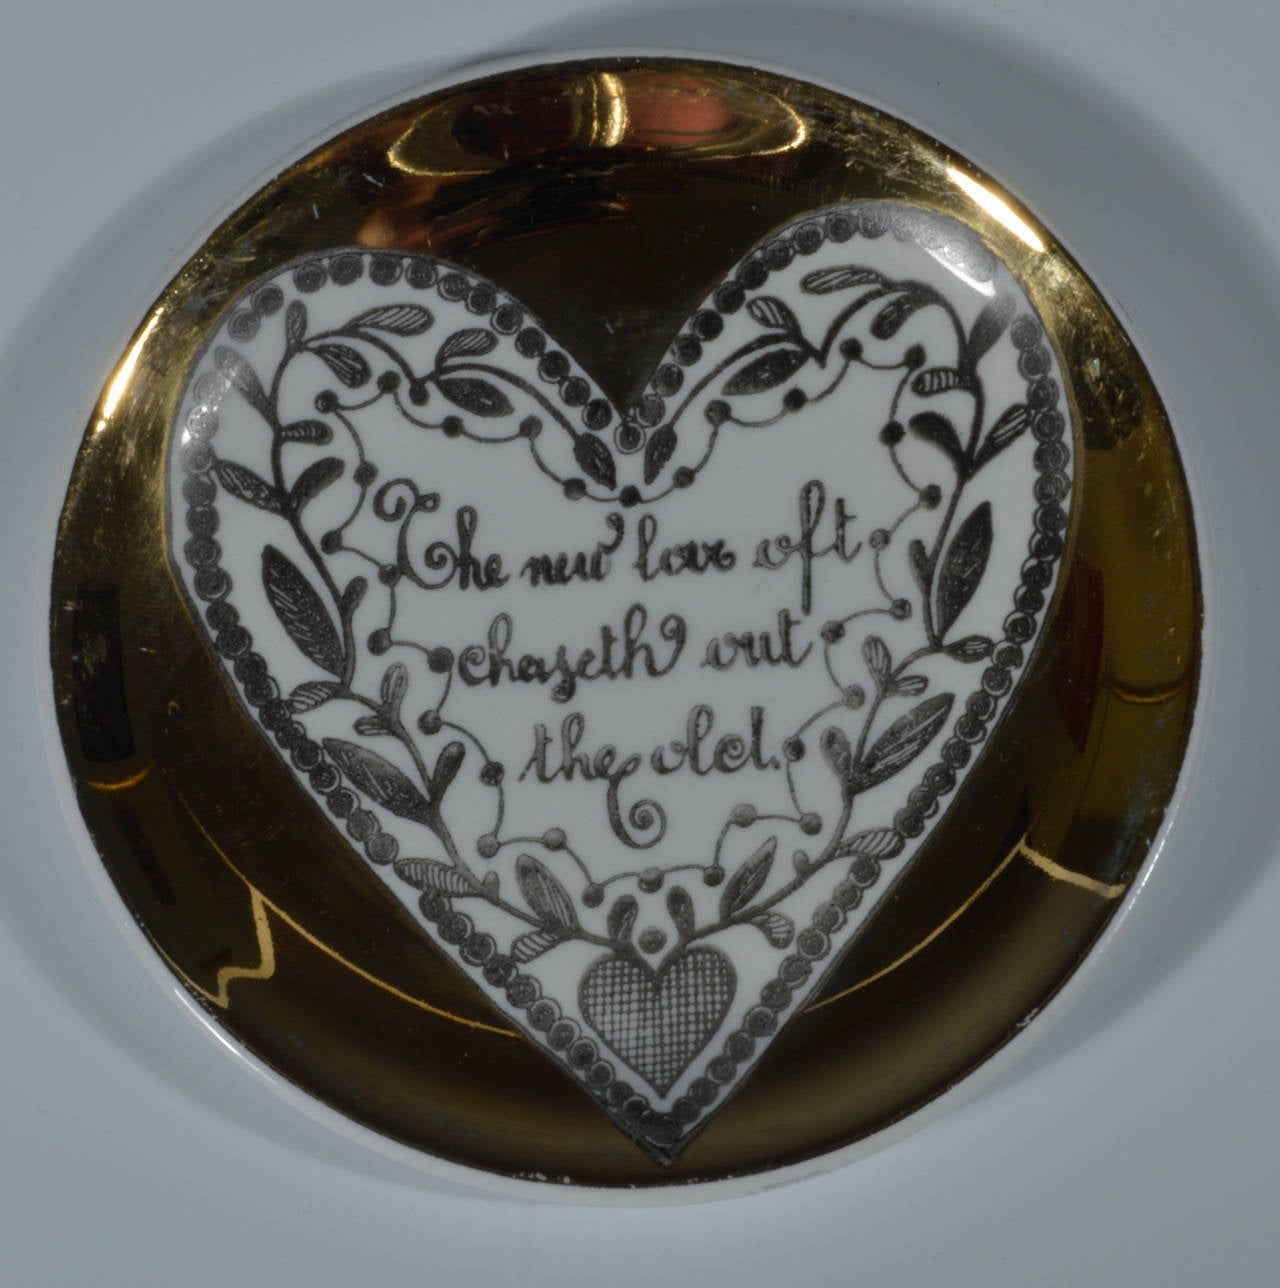 Mid-Century Modern Piero Fornasetti Porcelain Boxed Coaster Set with Love, Hearts and Sayings